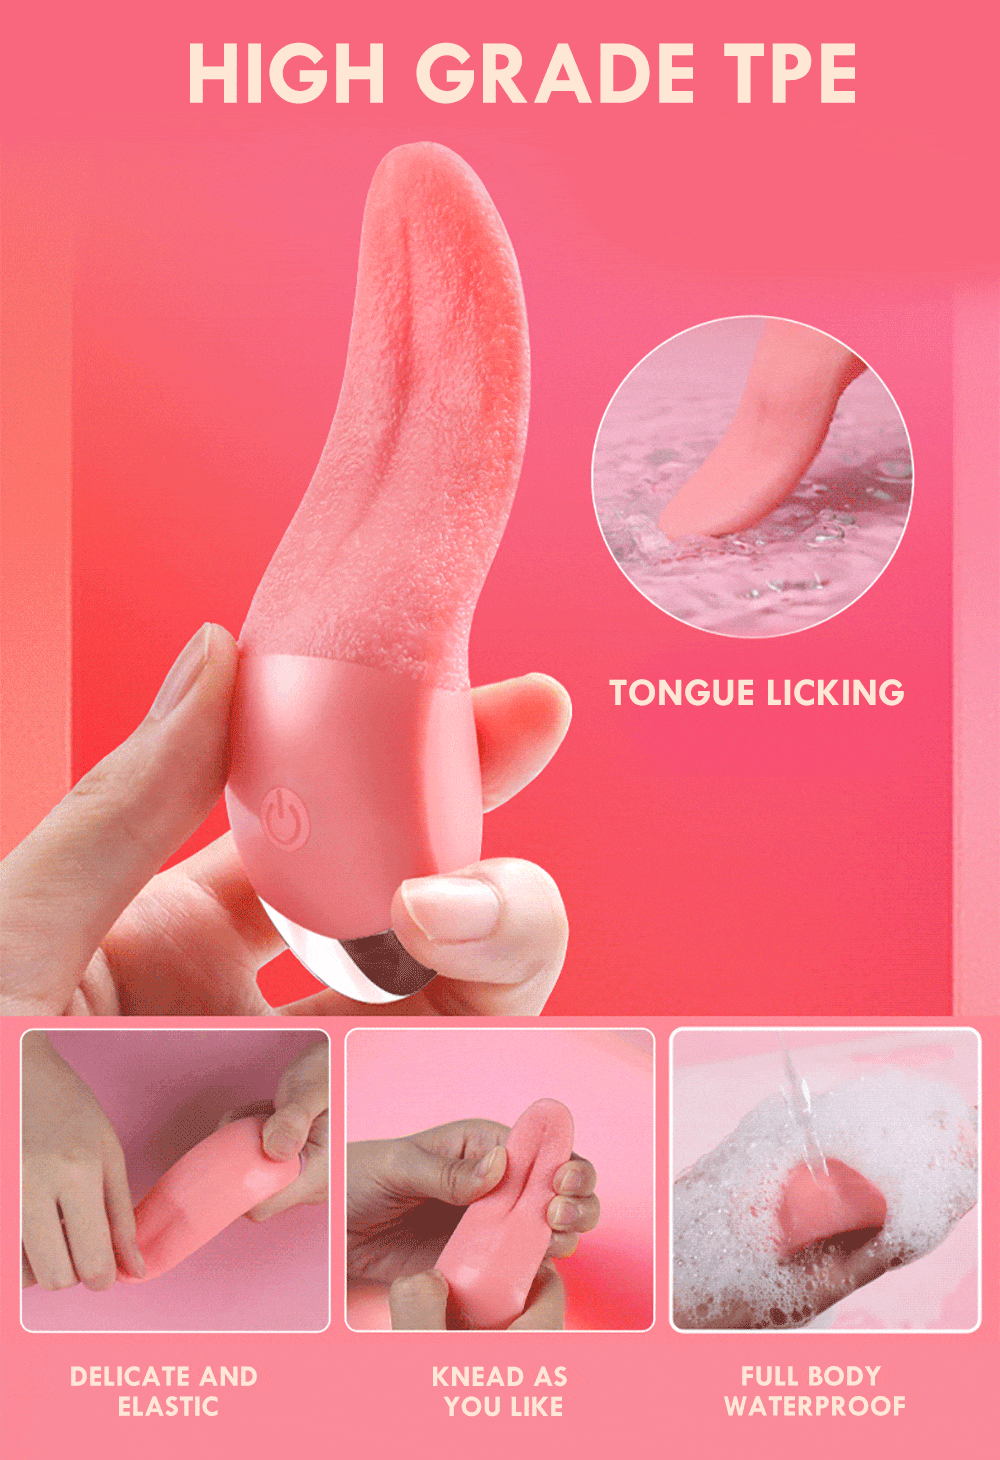 rose bud adult sex toy tongue licking